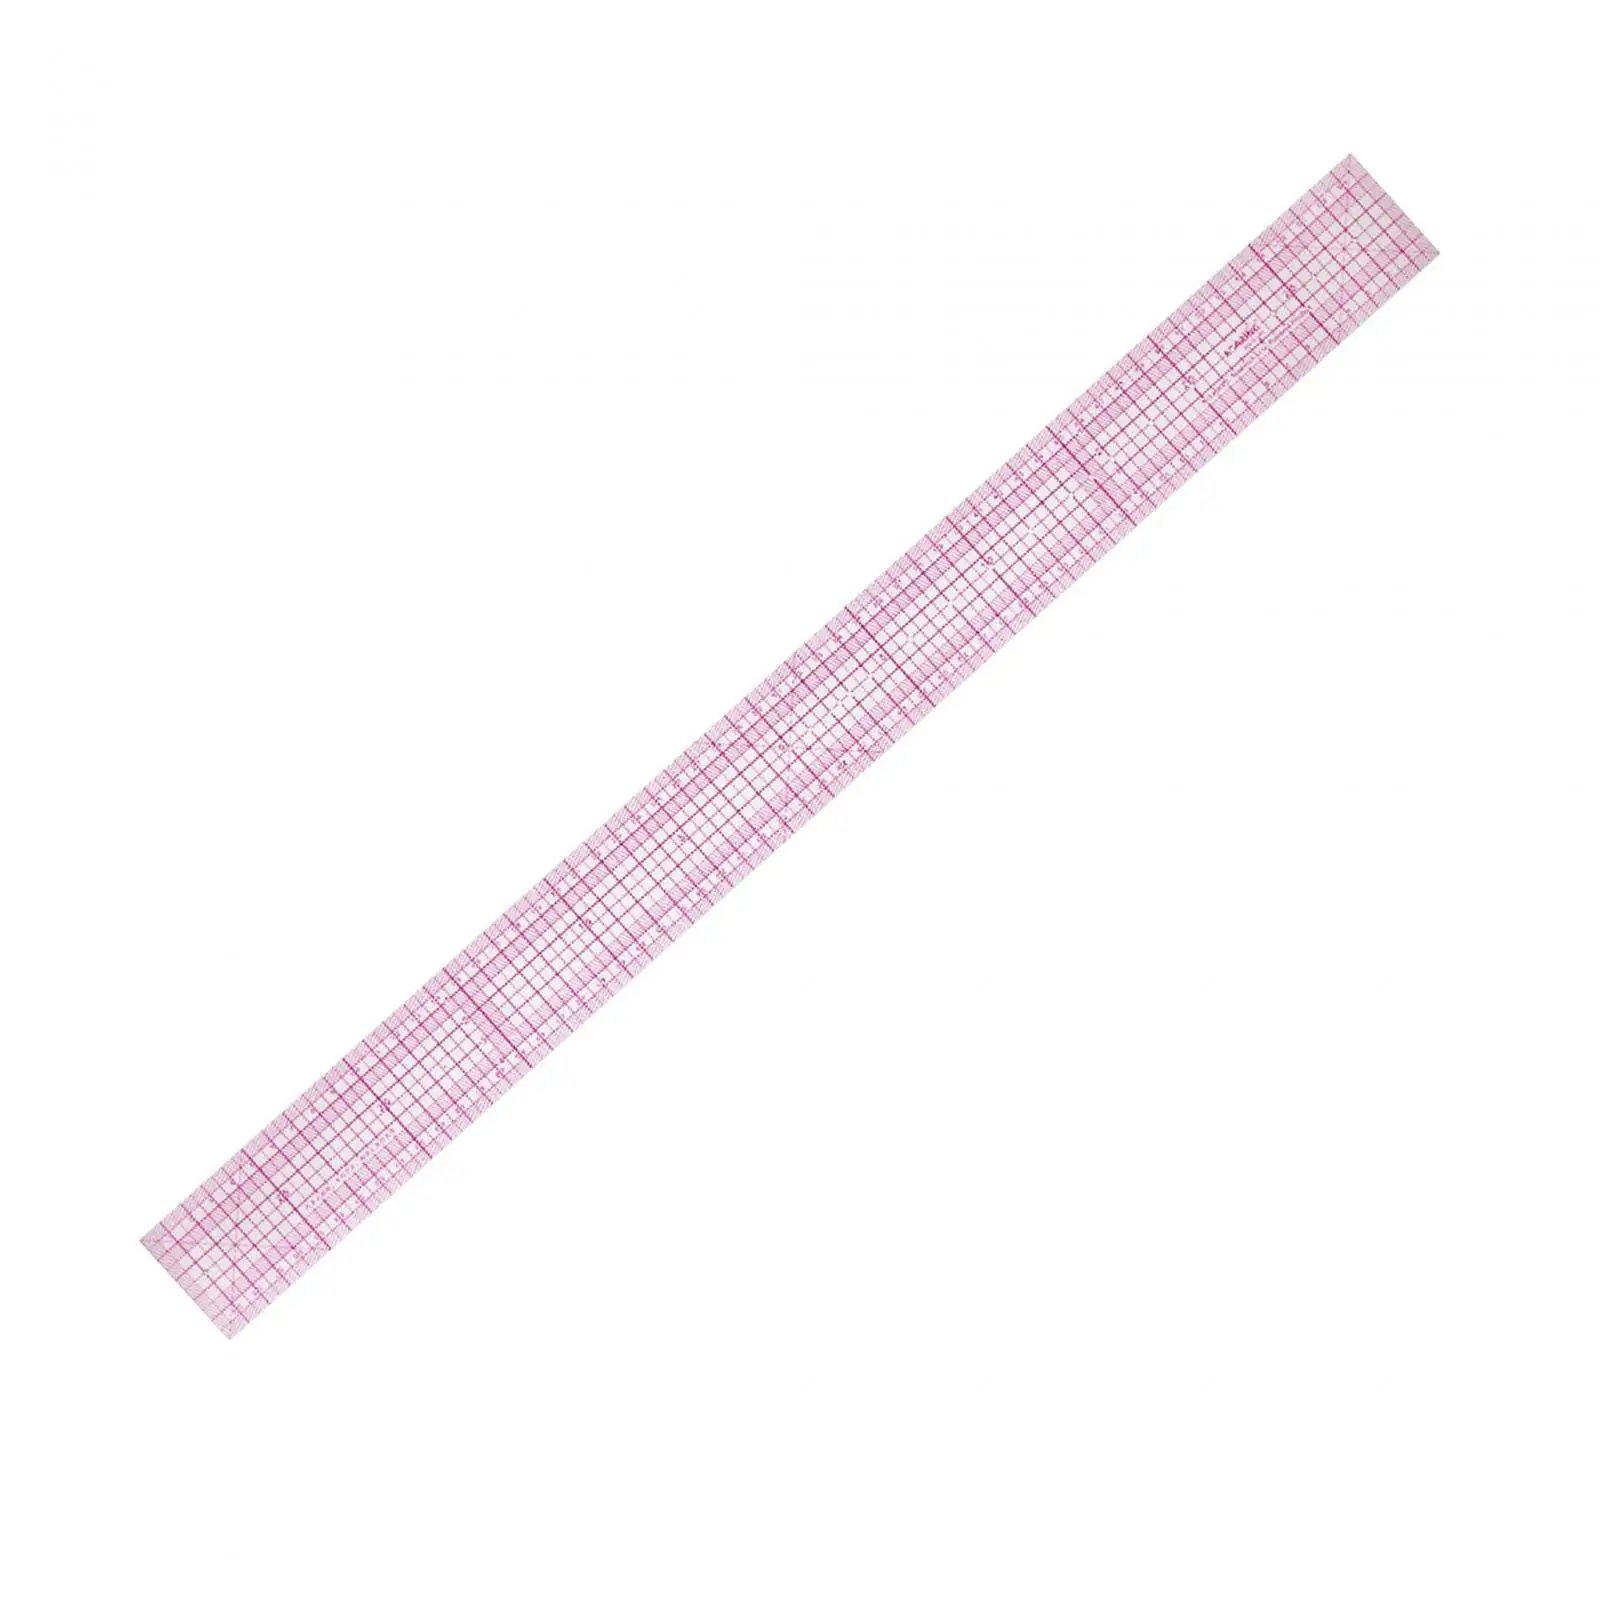 Sewing Cutting Ruler Garment Ruler 24in Clear Ruler for Tailor Measuring Sewing Accessories Crafts Making Precision Measurements